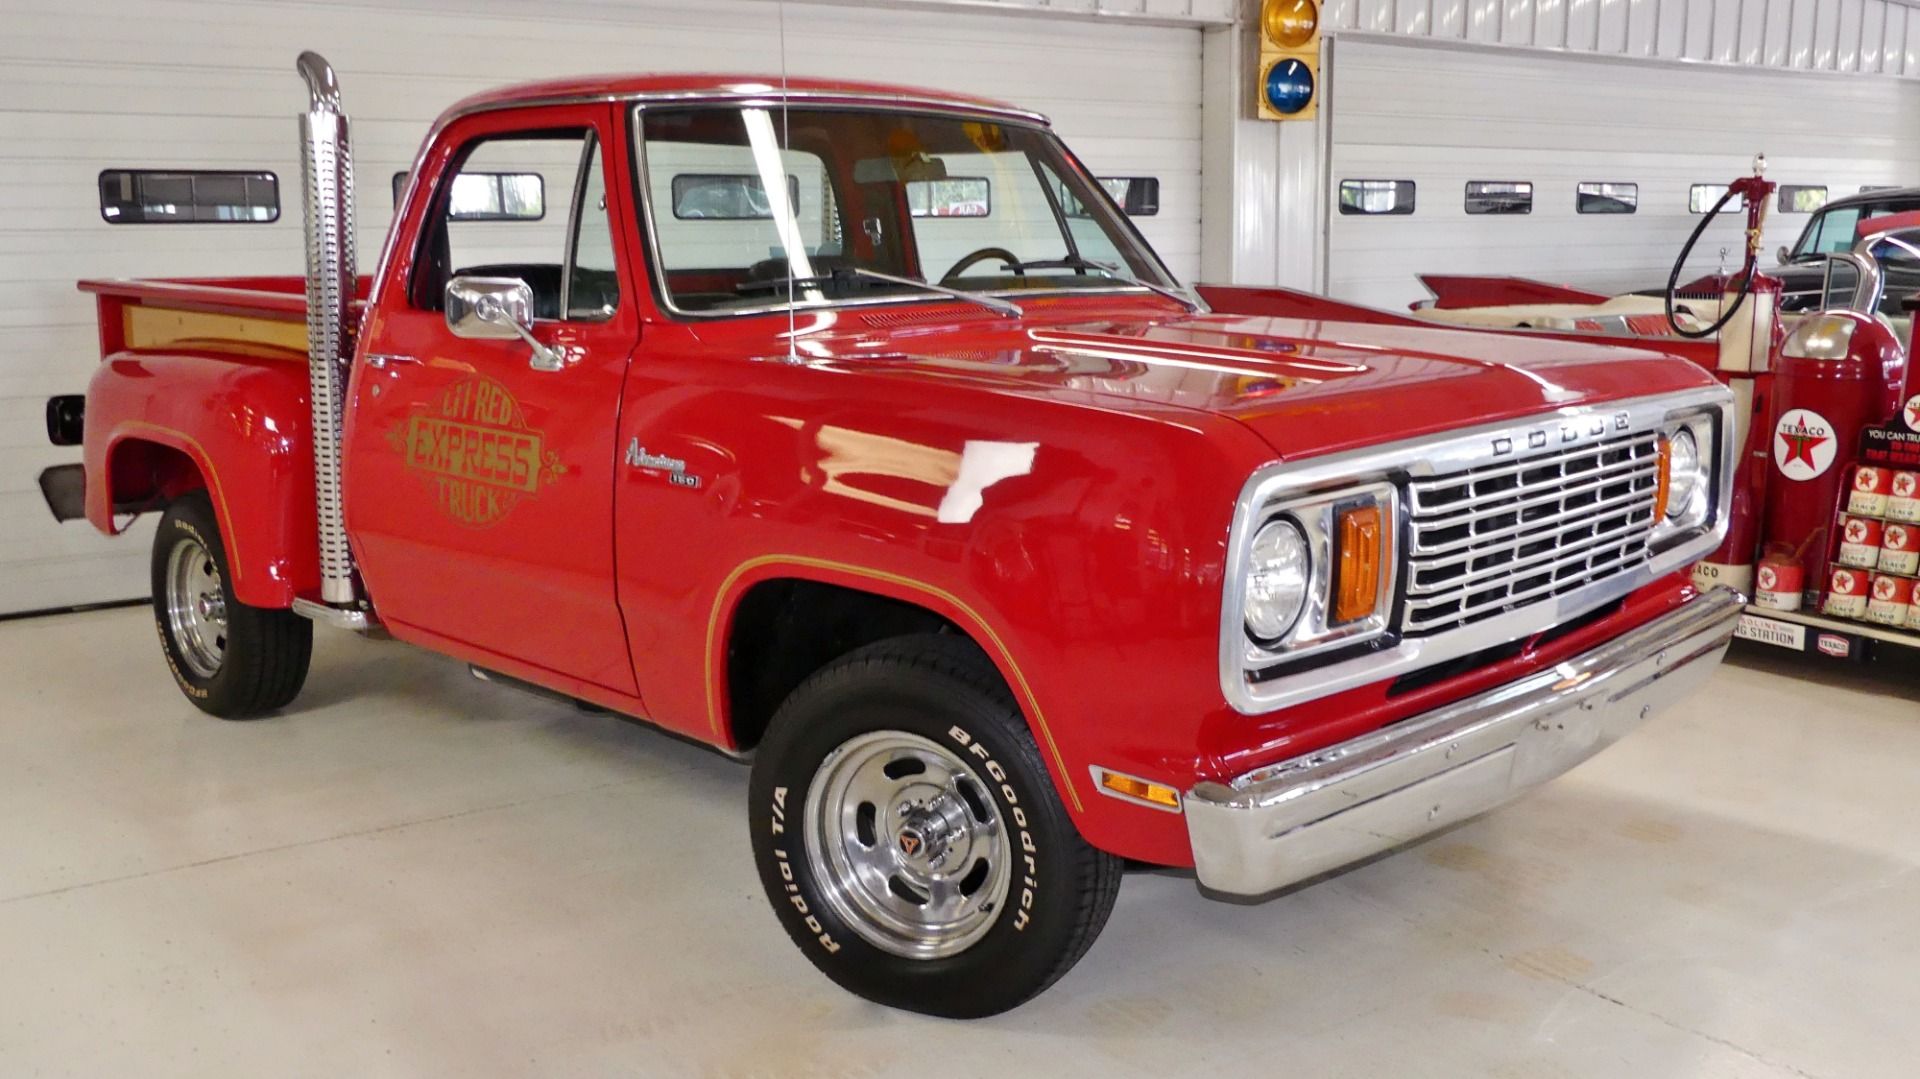 An Image Of A 1978 Dodge Lil' Red Express